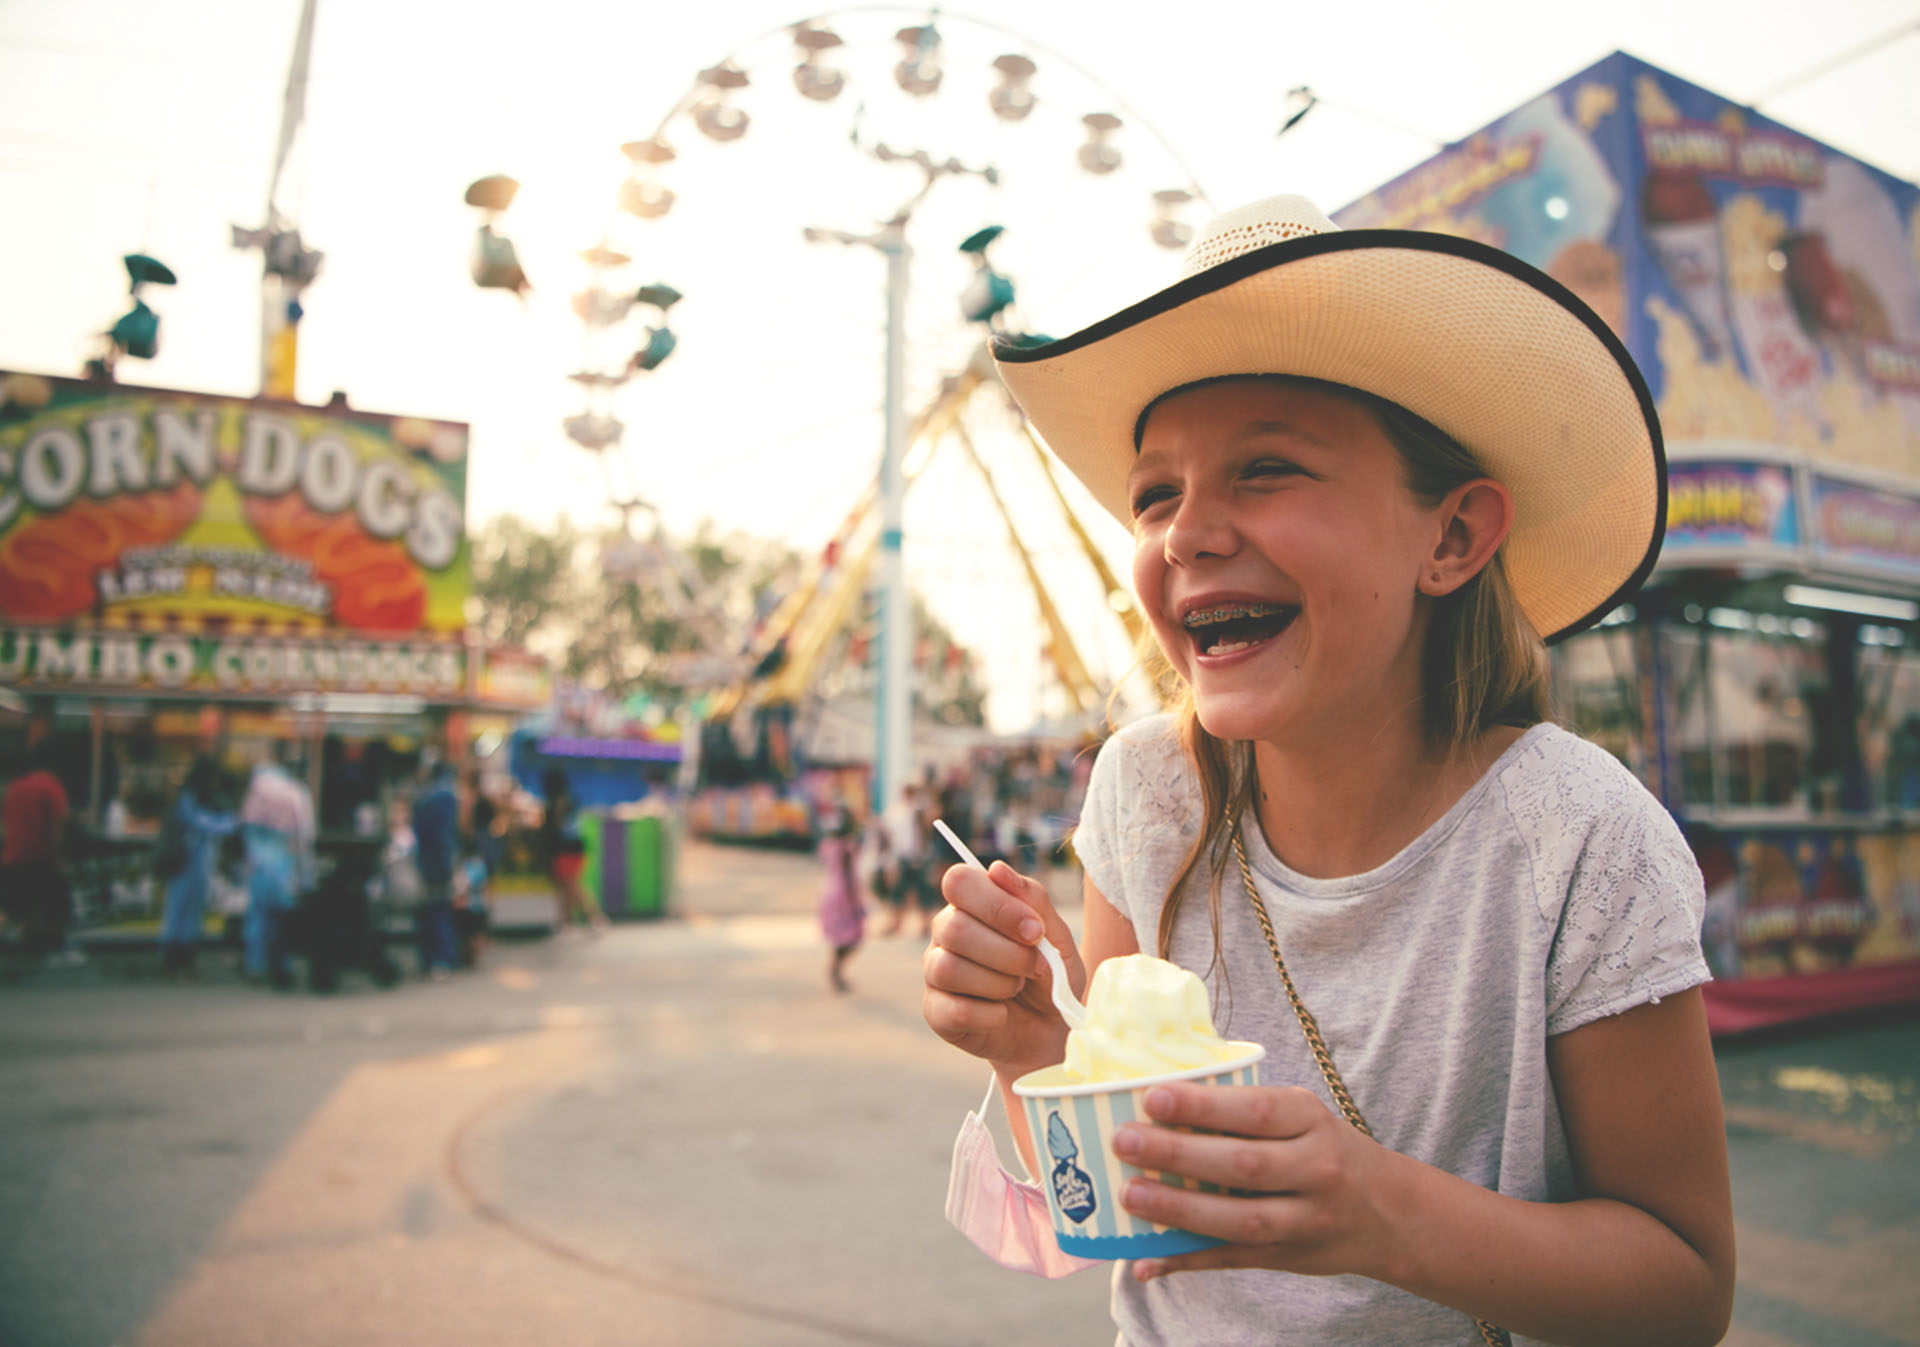 Young girl eating ice cream at the Stampede midway